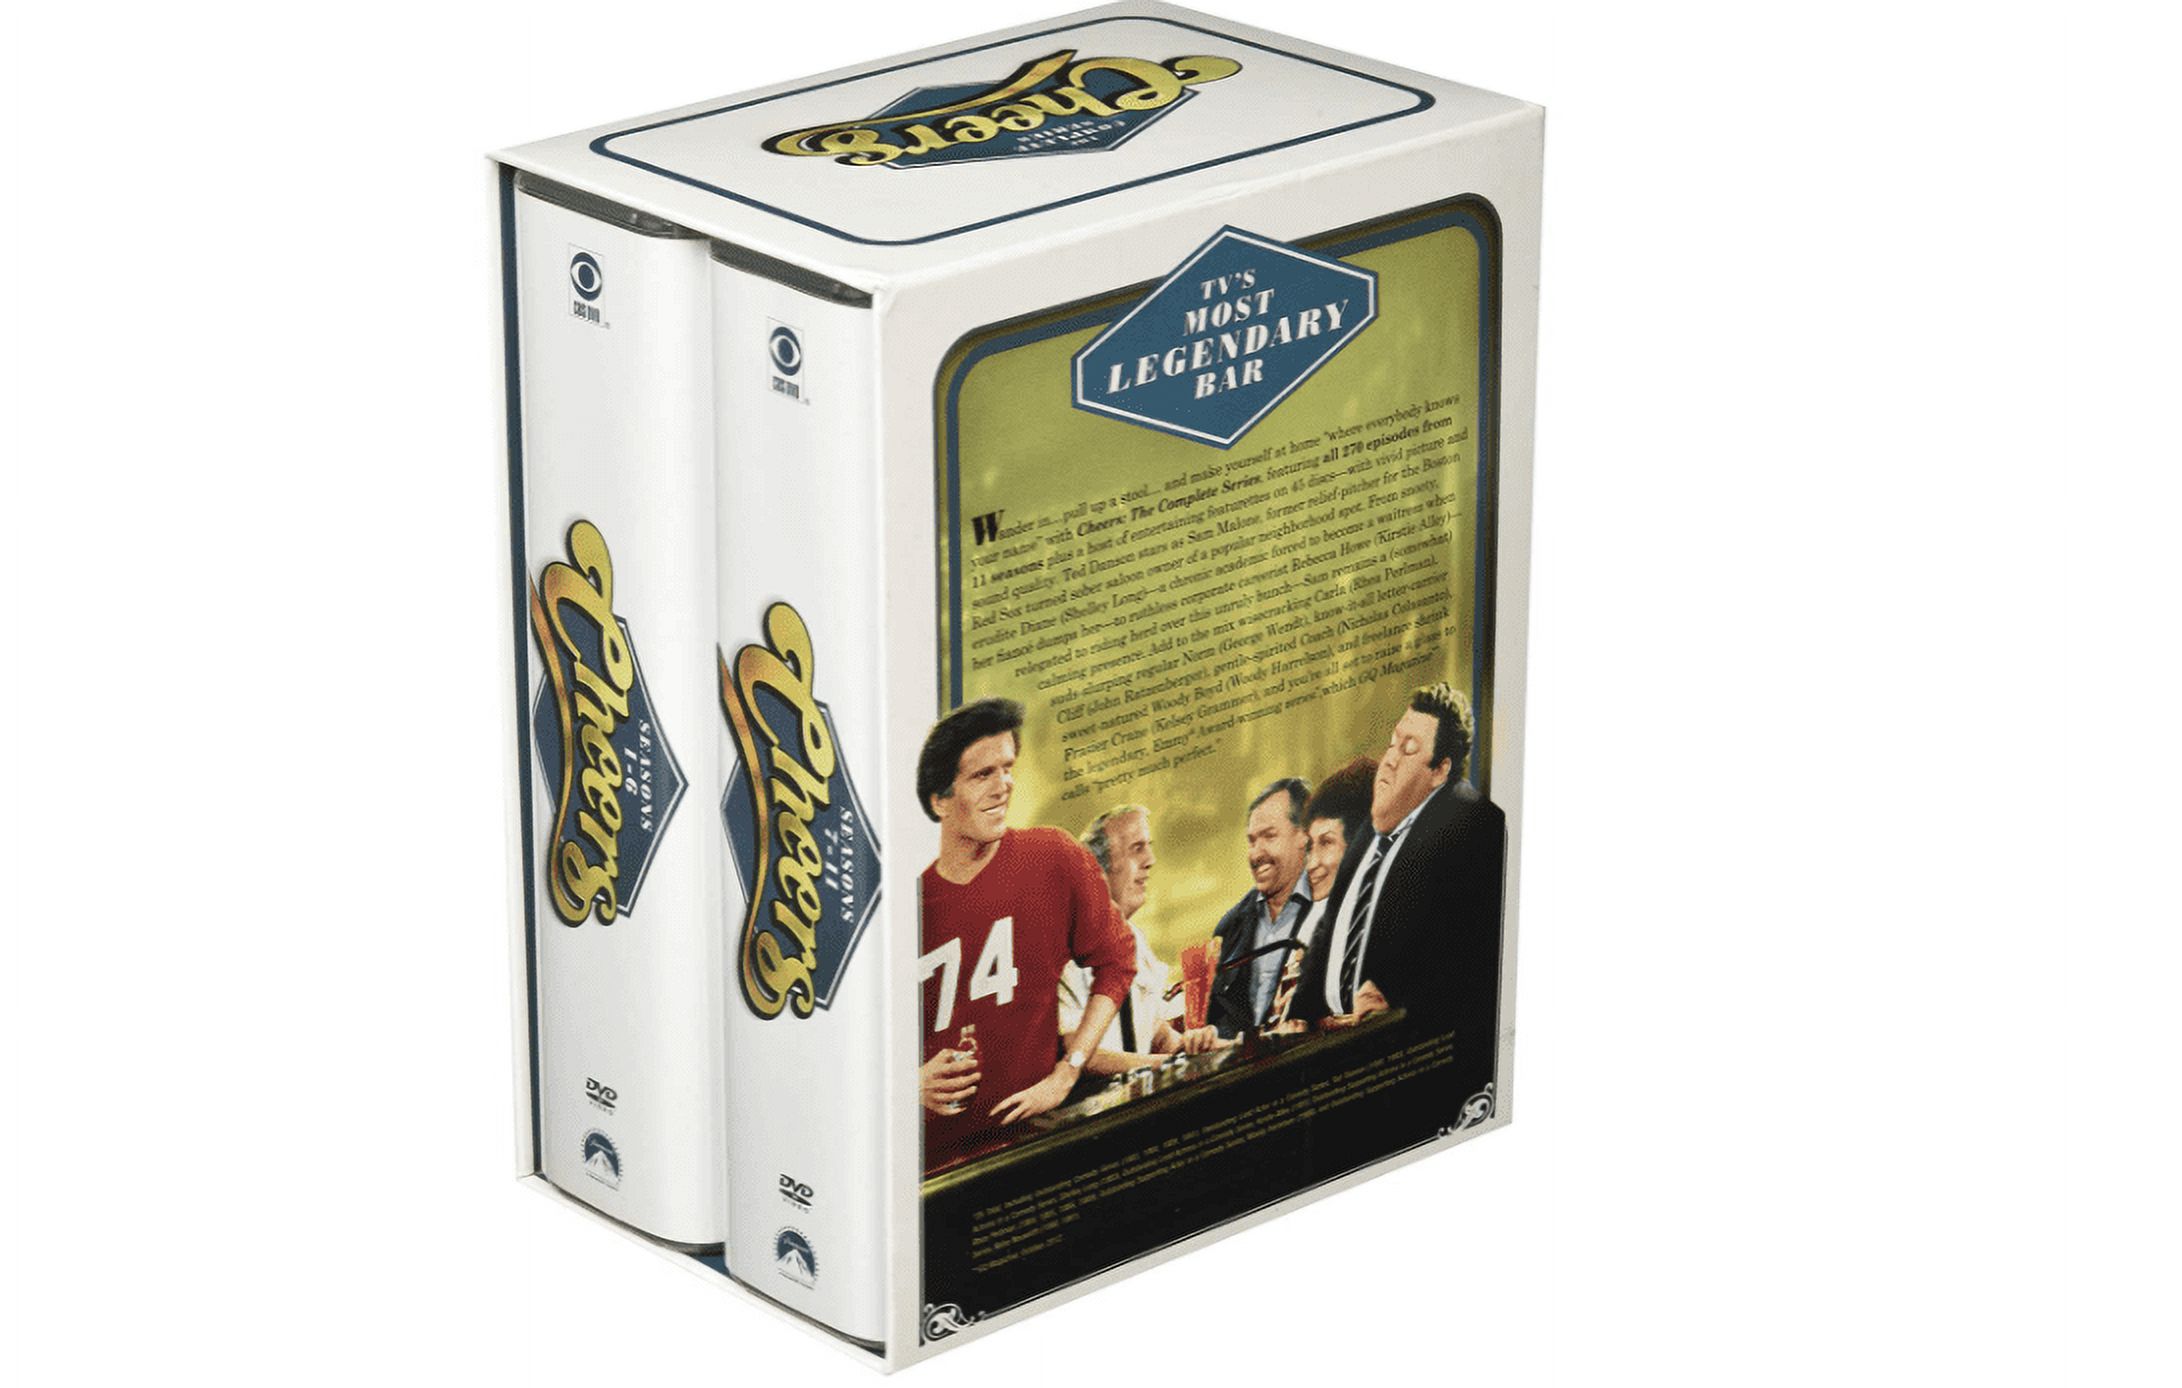 Cheers: The Complete Series (DVD) - image 2 of 2